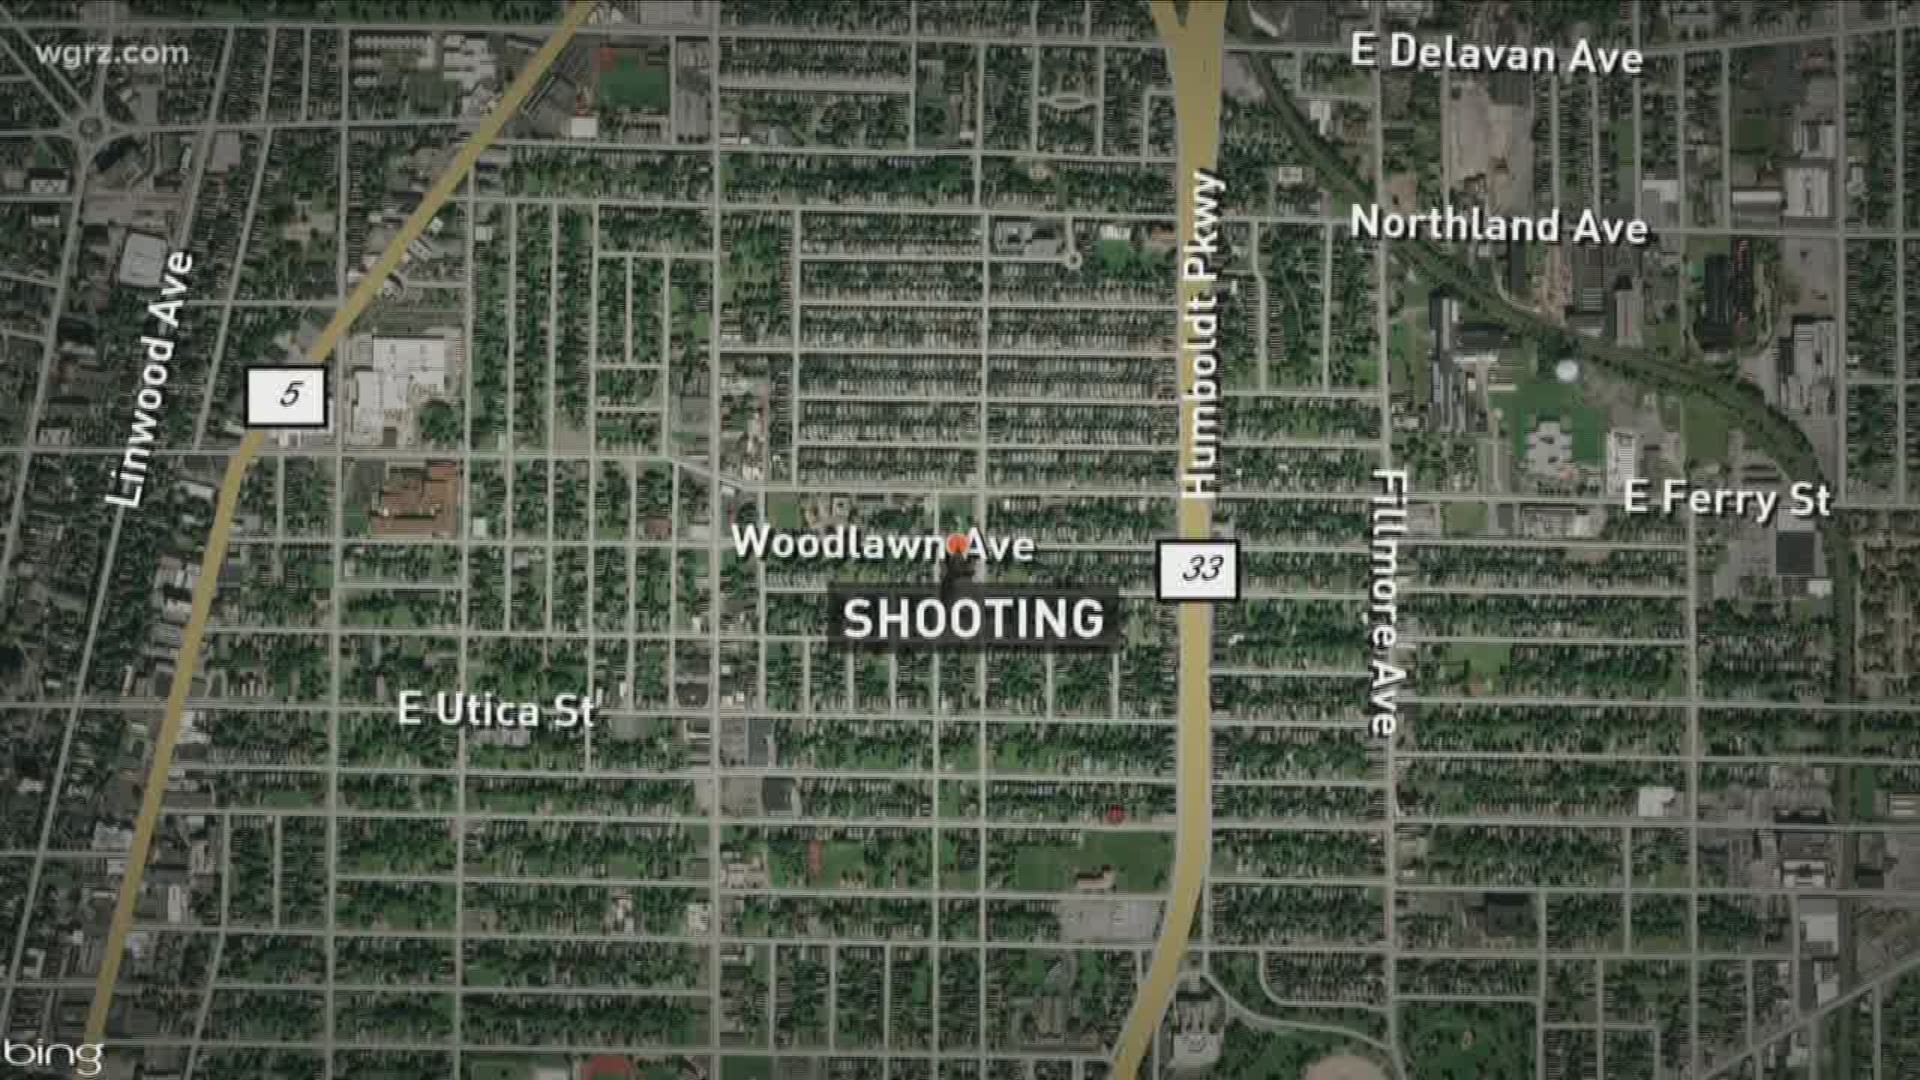 Man shot in the leg overnight on Woodlawn Ave.